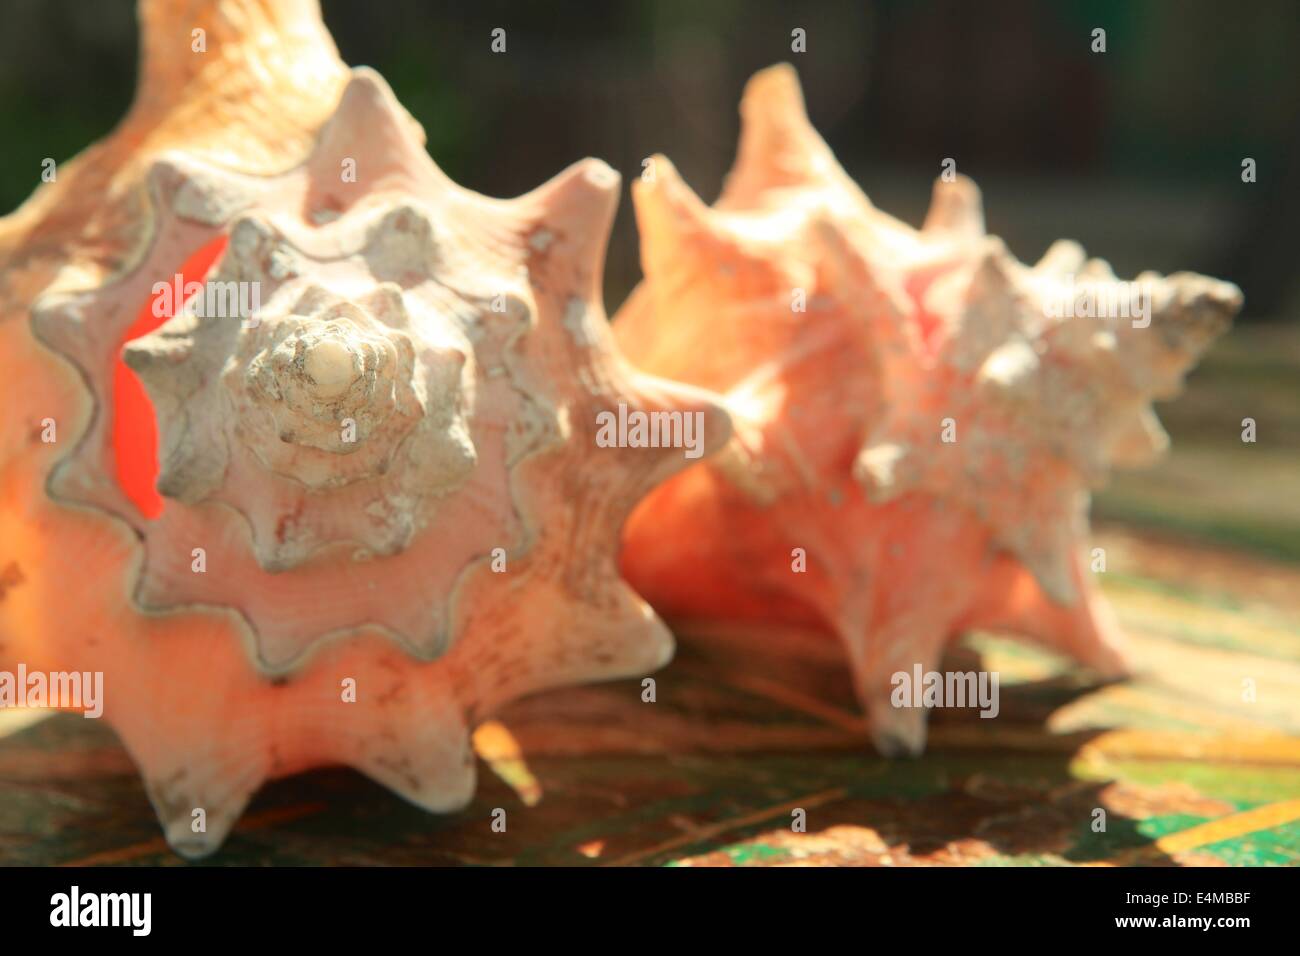 Beach scene of conch shells in Ambergris Caye, Belize, in the Caribbean Sea Stock Photo